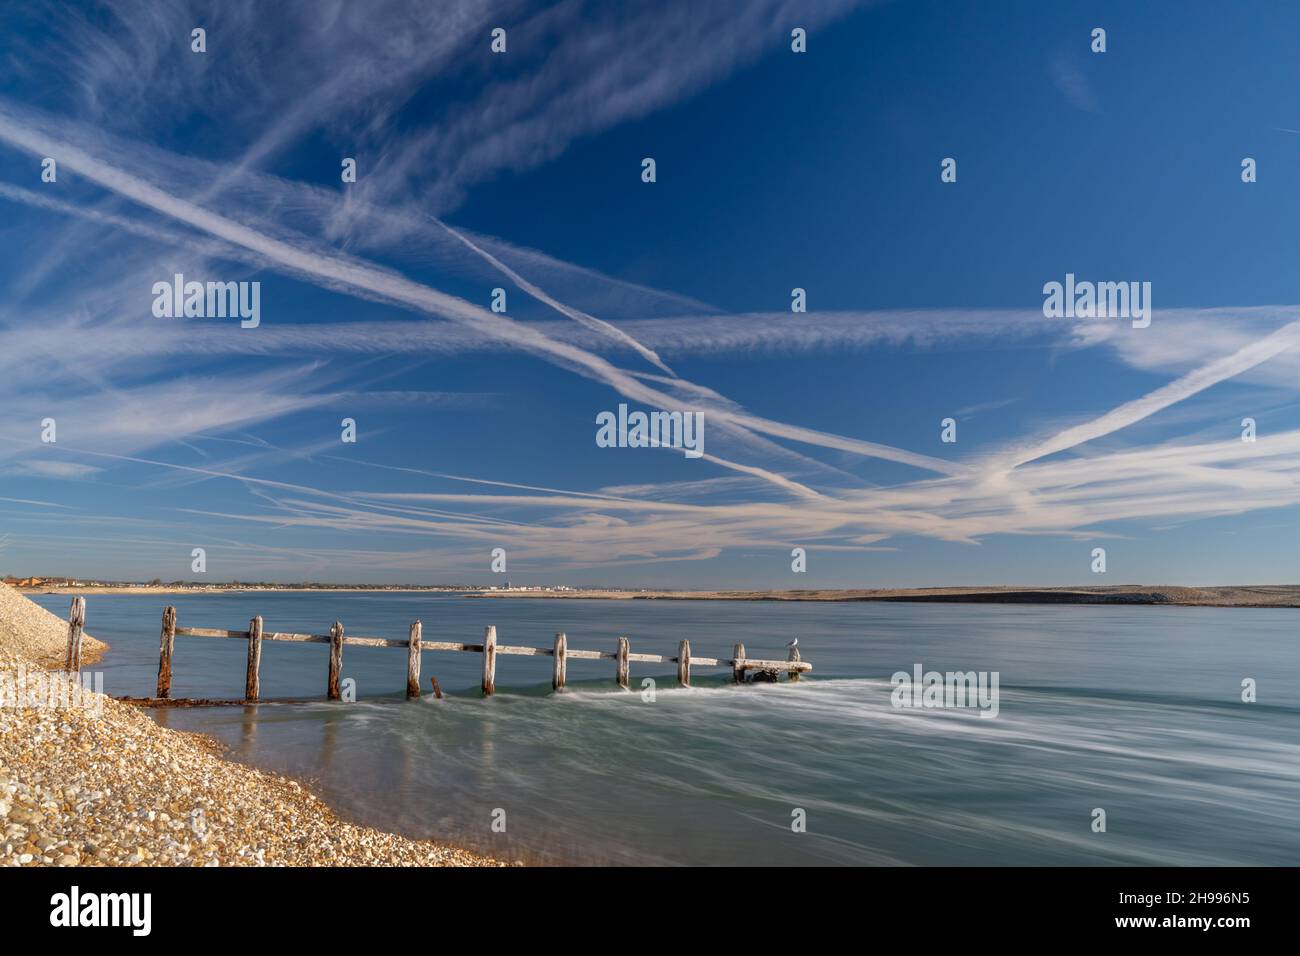 Water rushing into the entrance of Pagham harbour with an old groin looking towards Bognor Regis on a blue sky day with con trails. Stock Photo